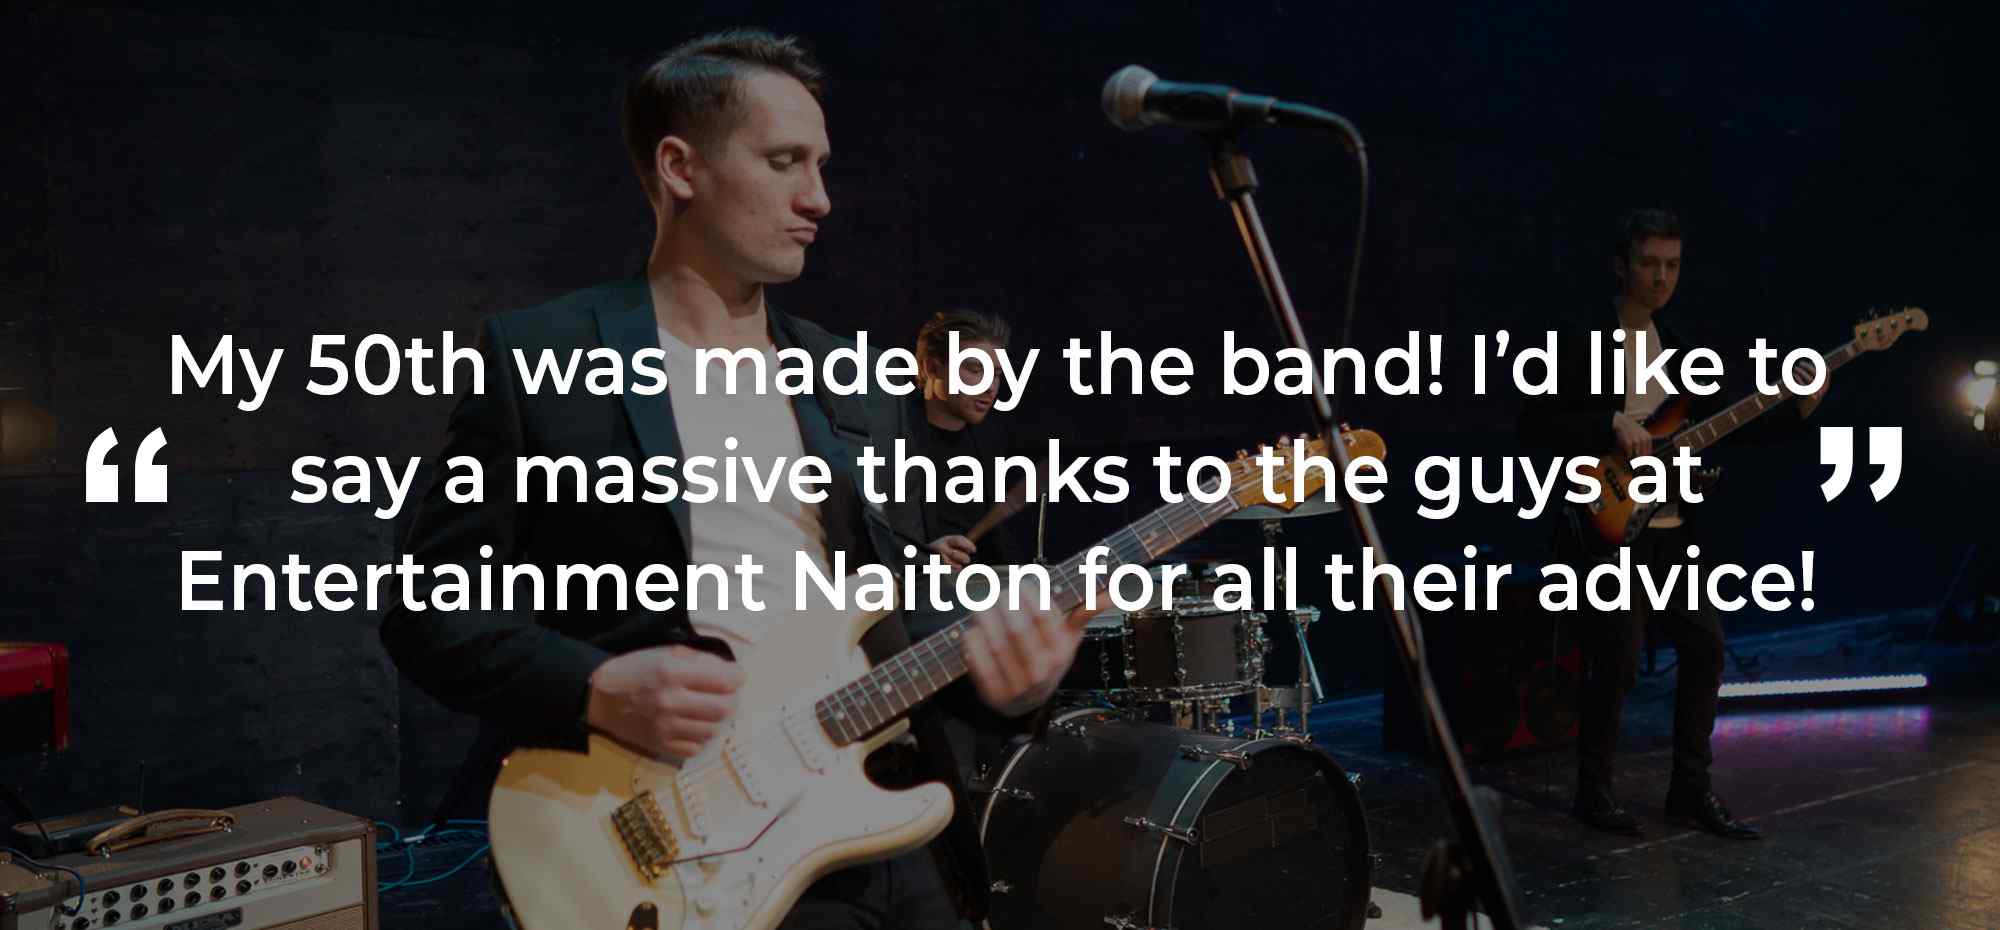 Client Review of a Party Band Denbighshire